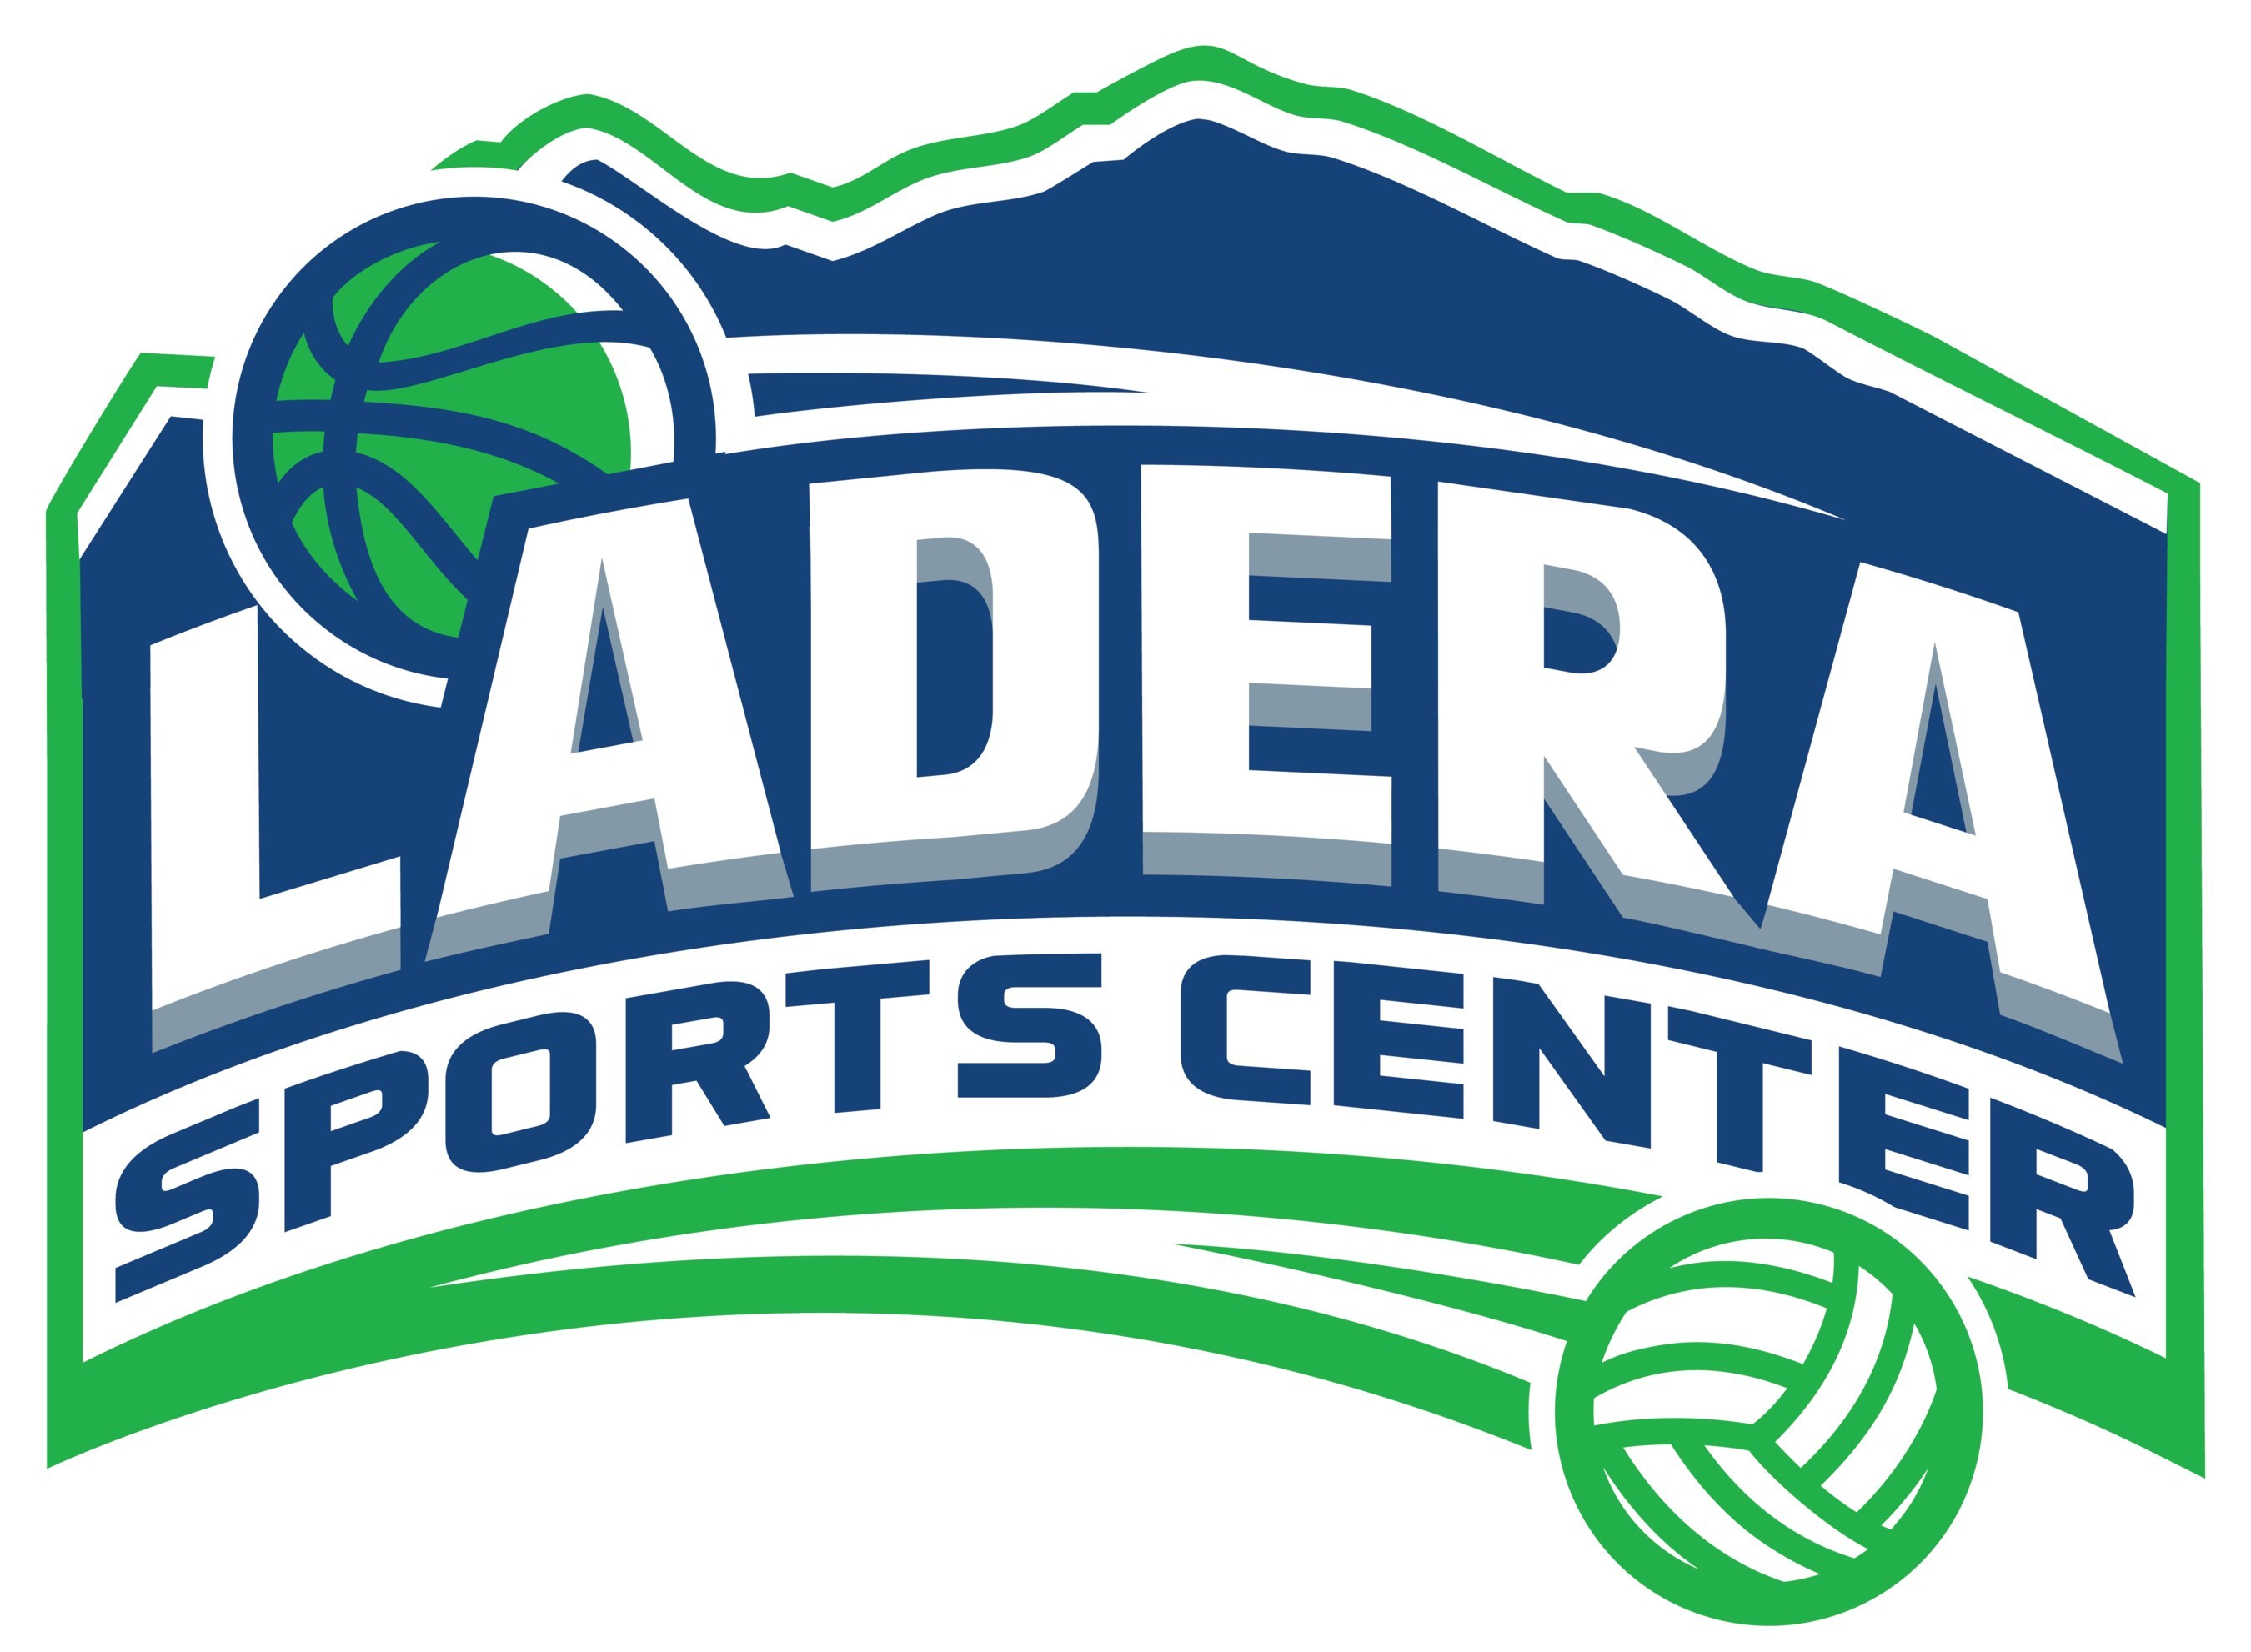 Ladera Sports Center Announces Results for Last Week's "The Judgement